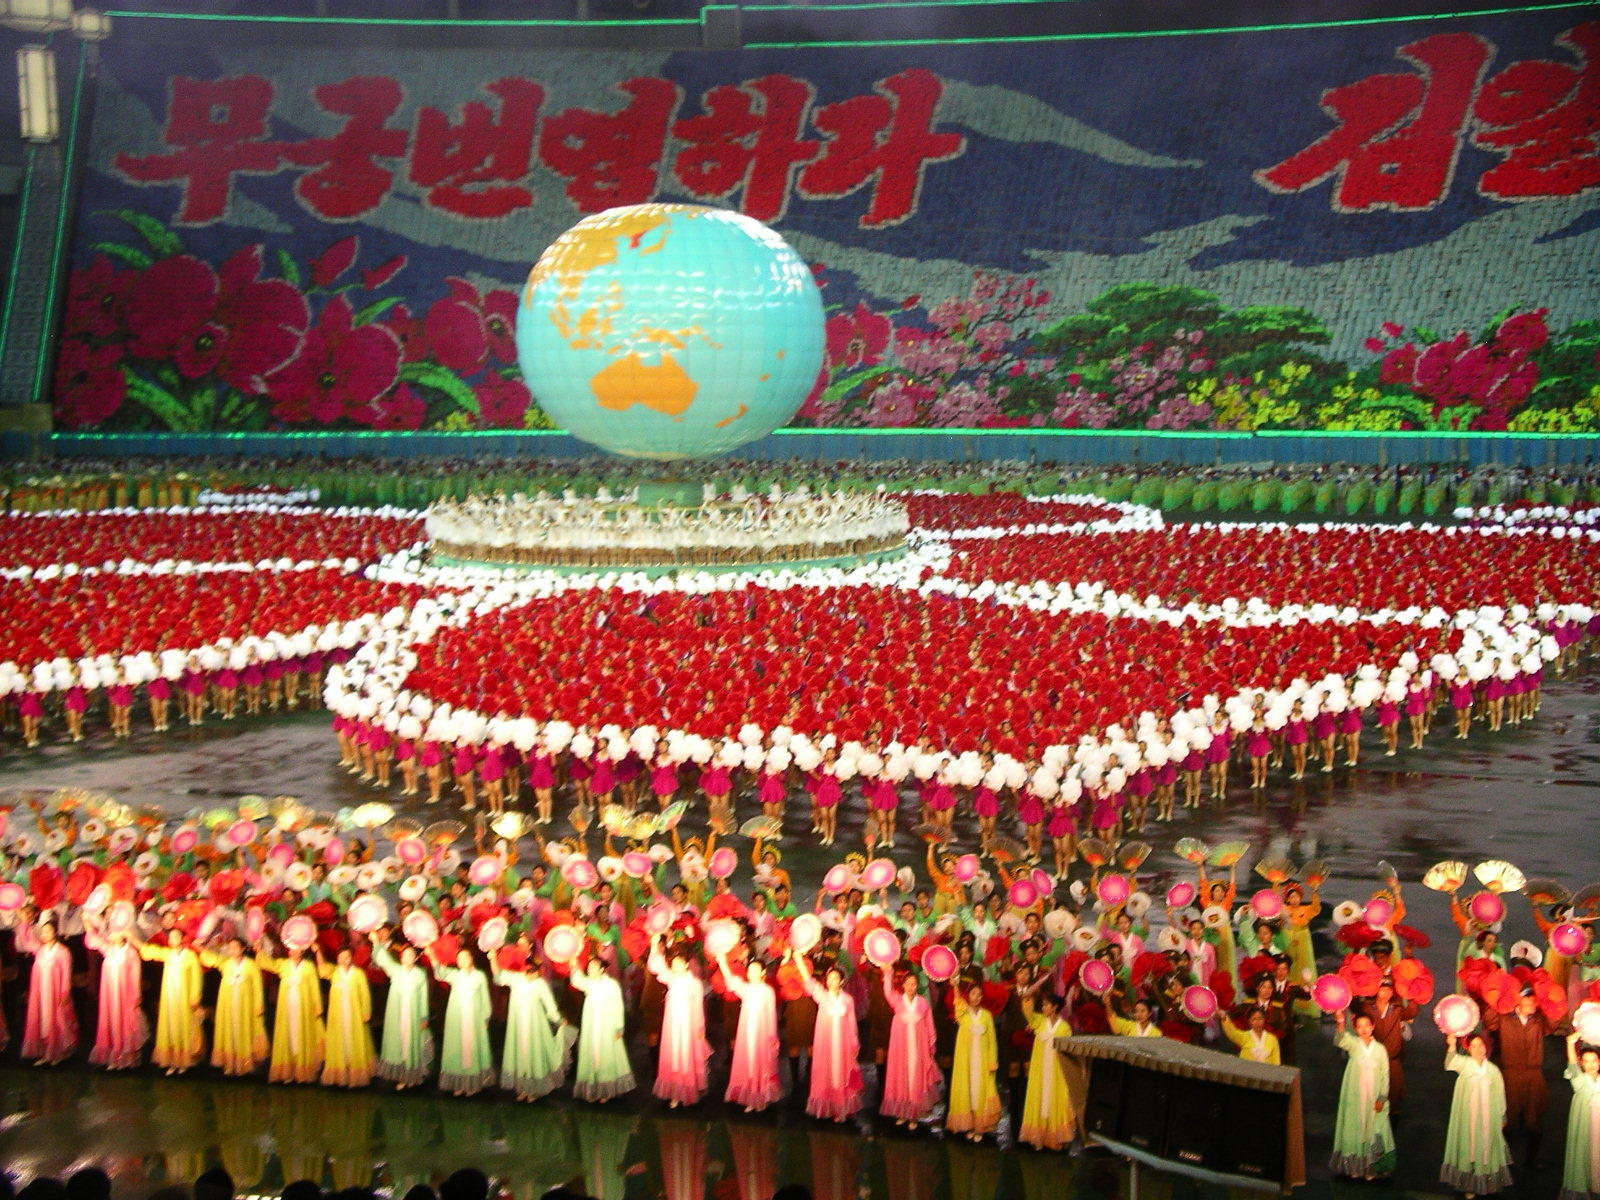 A colorful mass dance performance